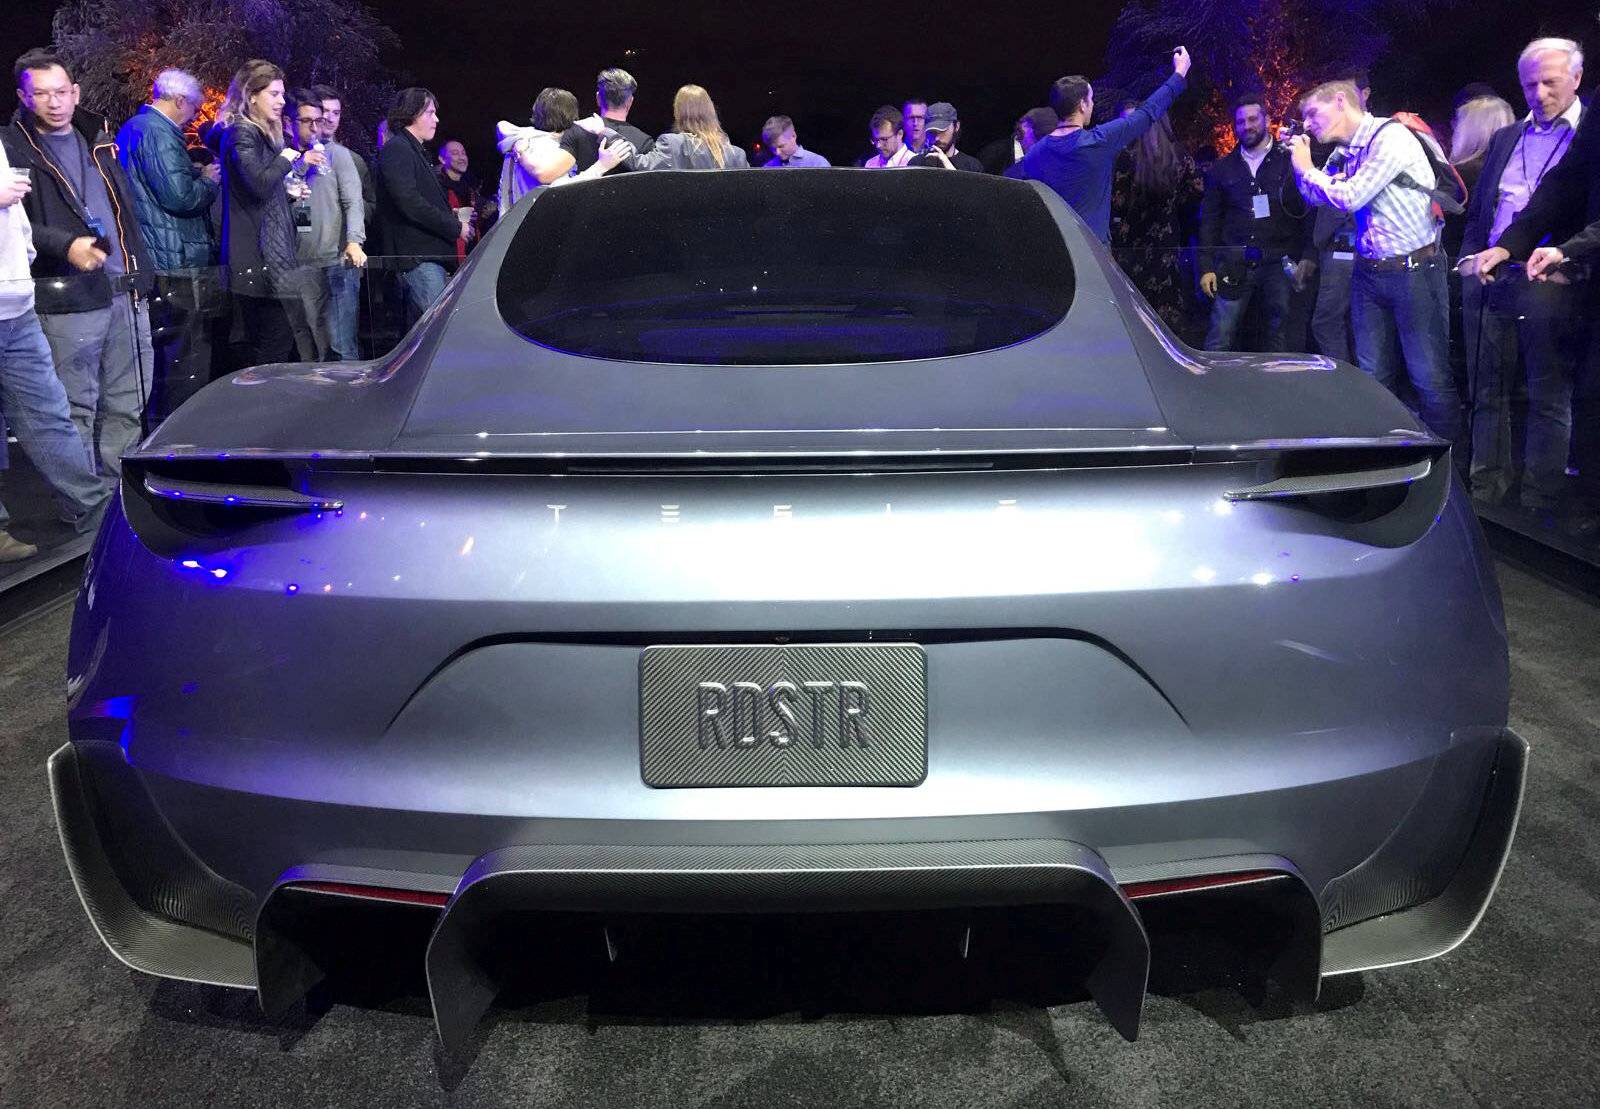 Tesla's new Roadster is unveiled during a presentation in Hawthorne